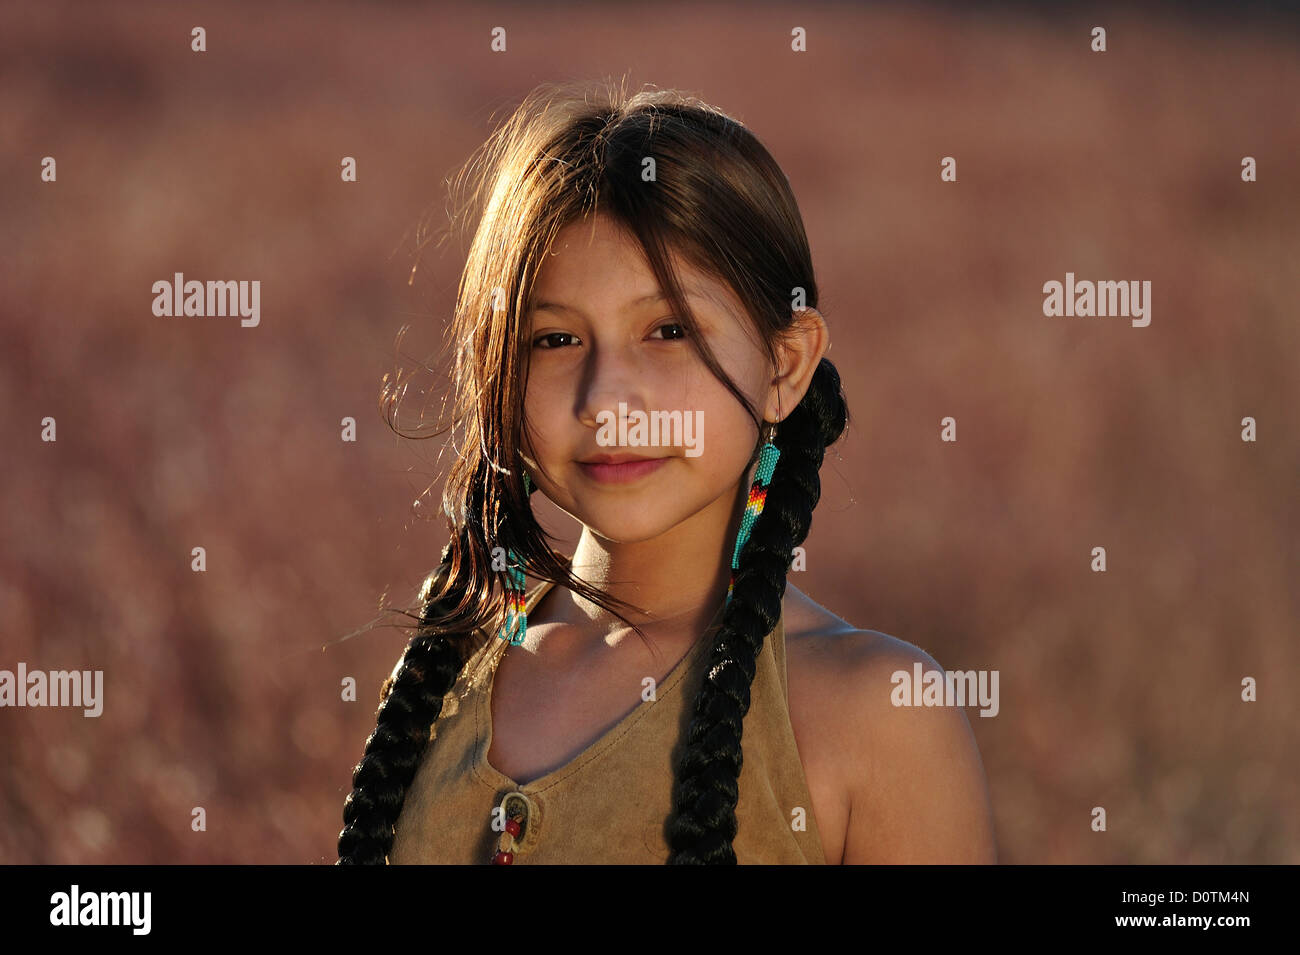 Indian girl, Ina King, Crow Creek, Sioux, Tribe, South Dakota, USA, United States, America, North America, model released, nativ Stock Photo